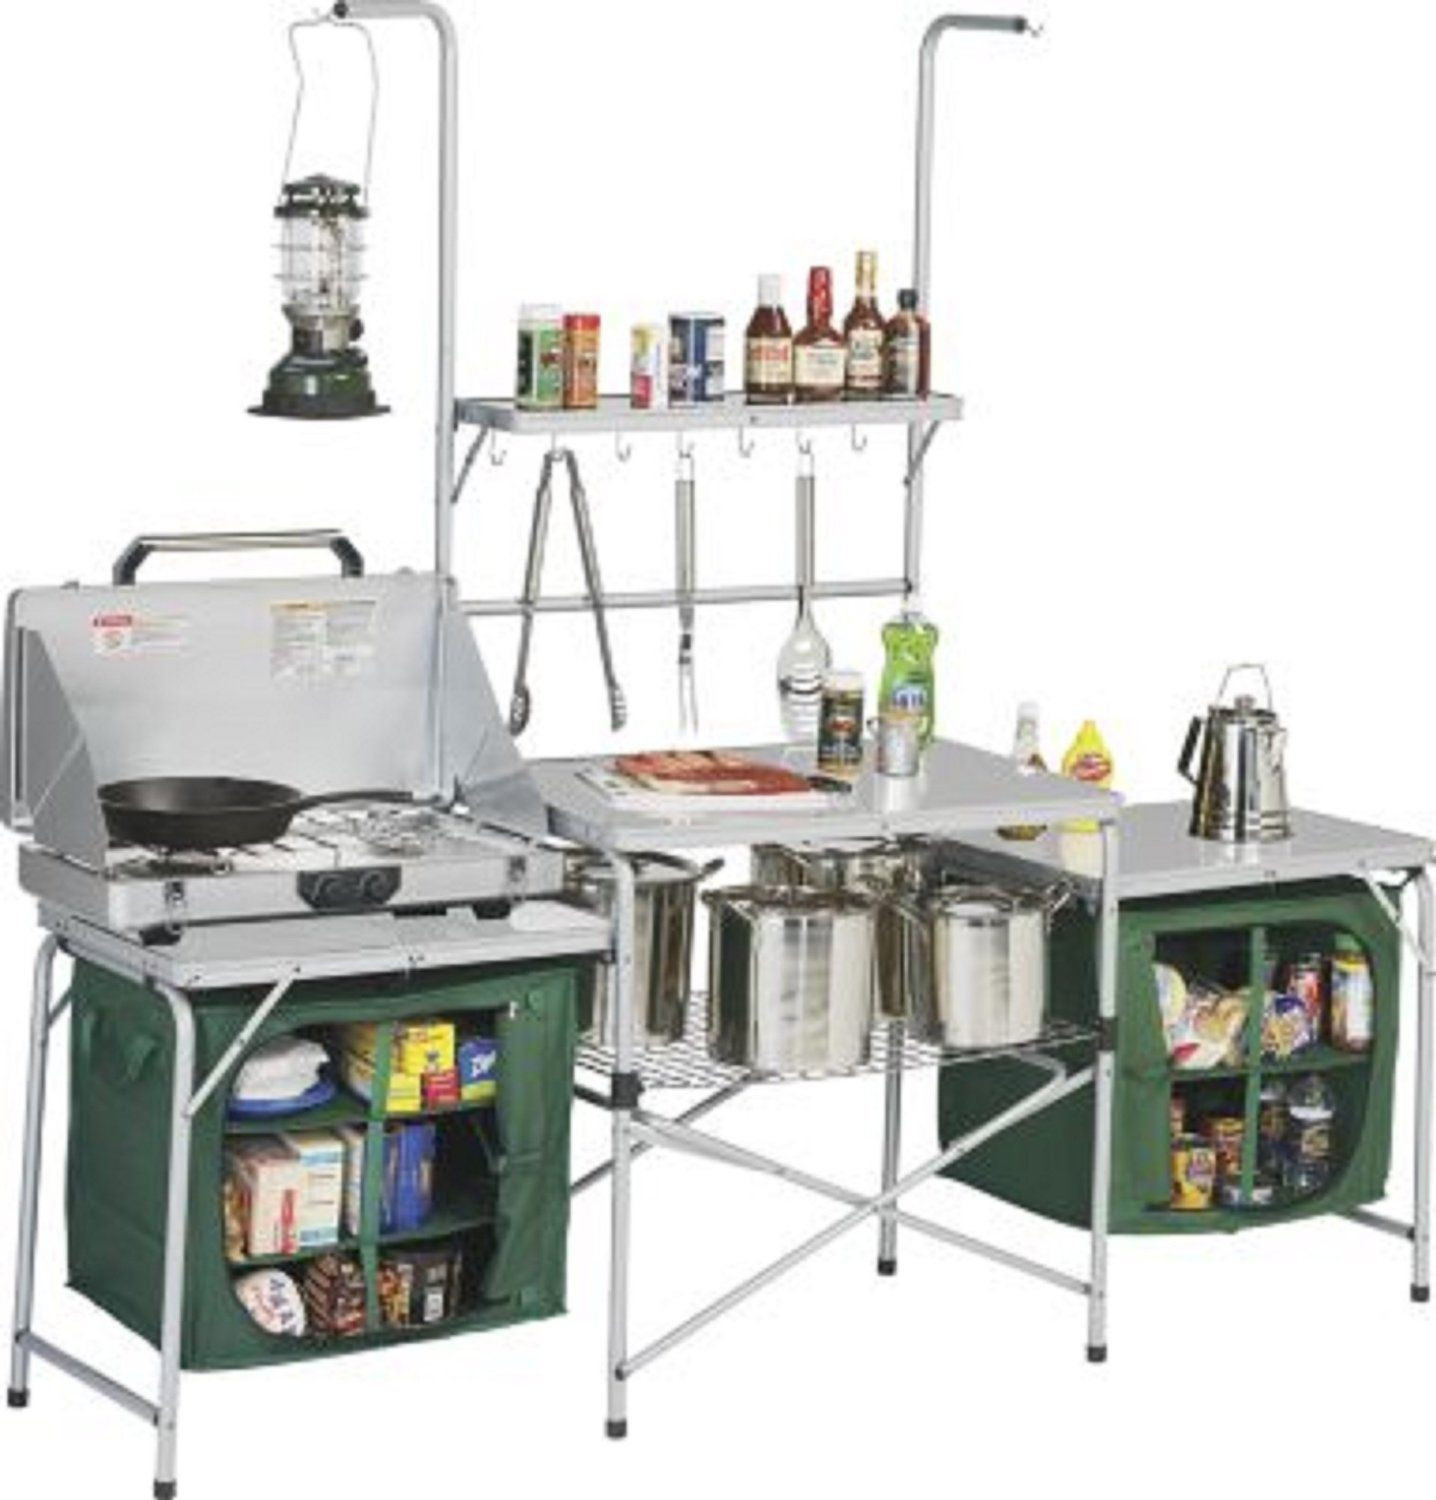 Camping Outdoor Kitchen
 $250 Amazon Outdoor Deluxe Portable Camping Kitchen